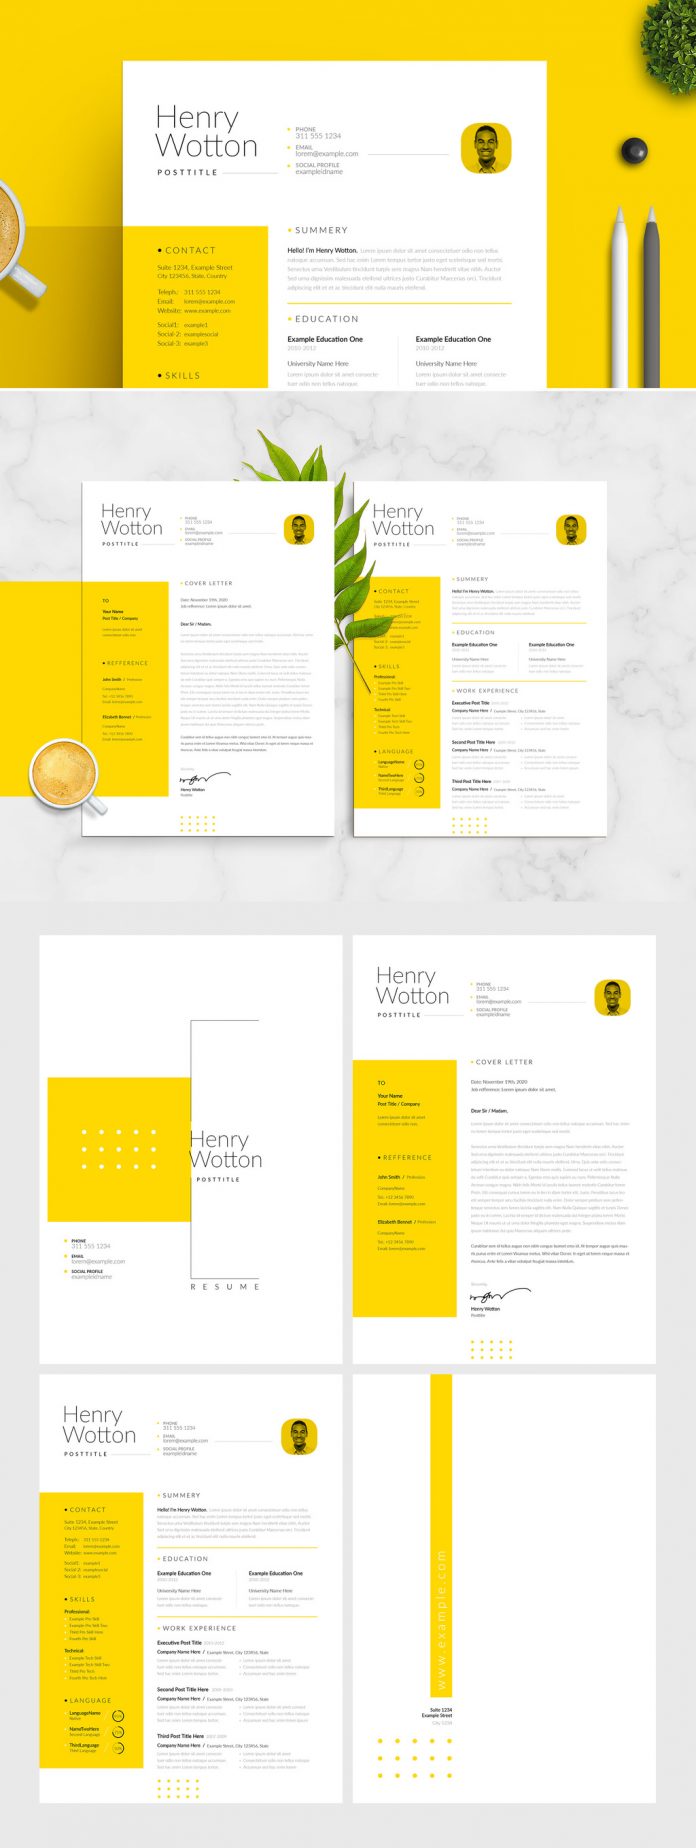 Minimal Resume and Cover Letter Layout with Yellow Accent